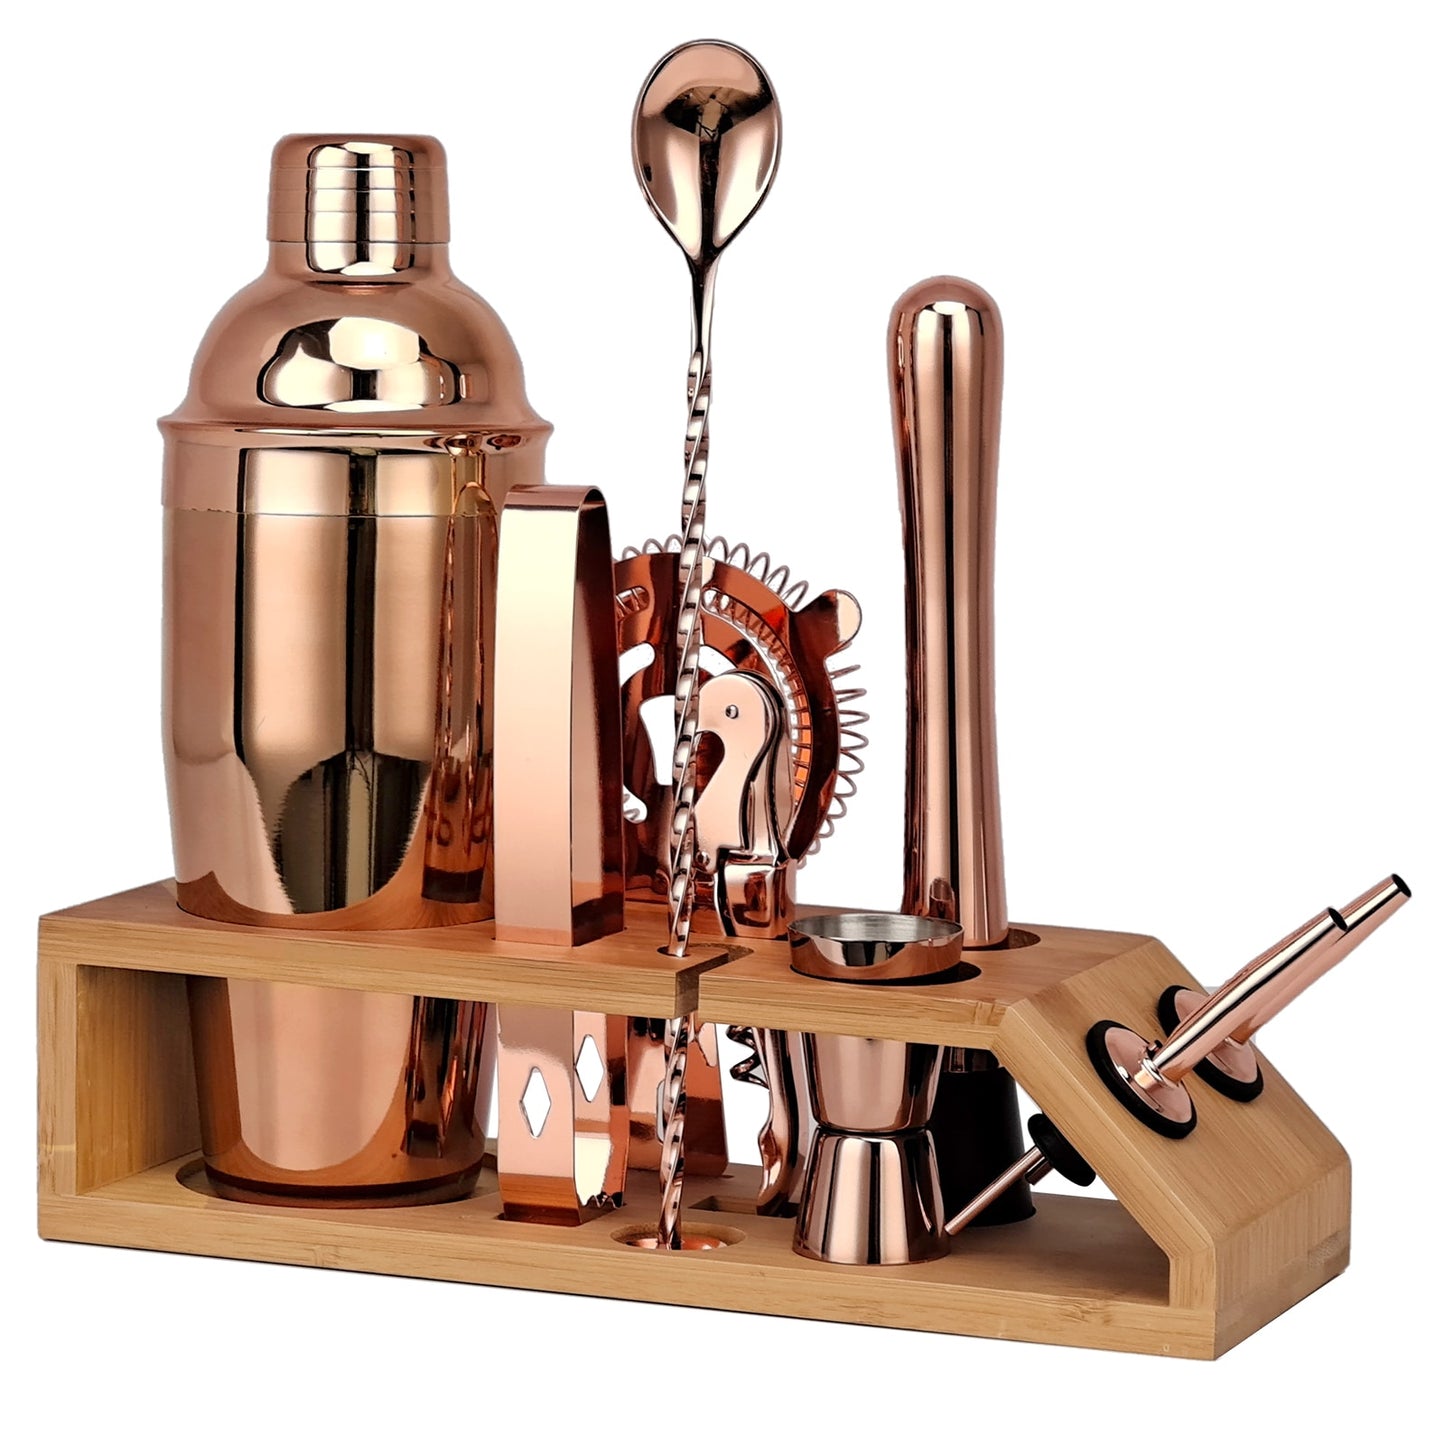 Bartender Kit - Rose Gold Cocktail Shaker Set With Trapezoidal Bamboo Stand